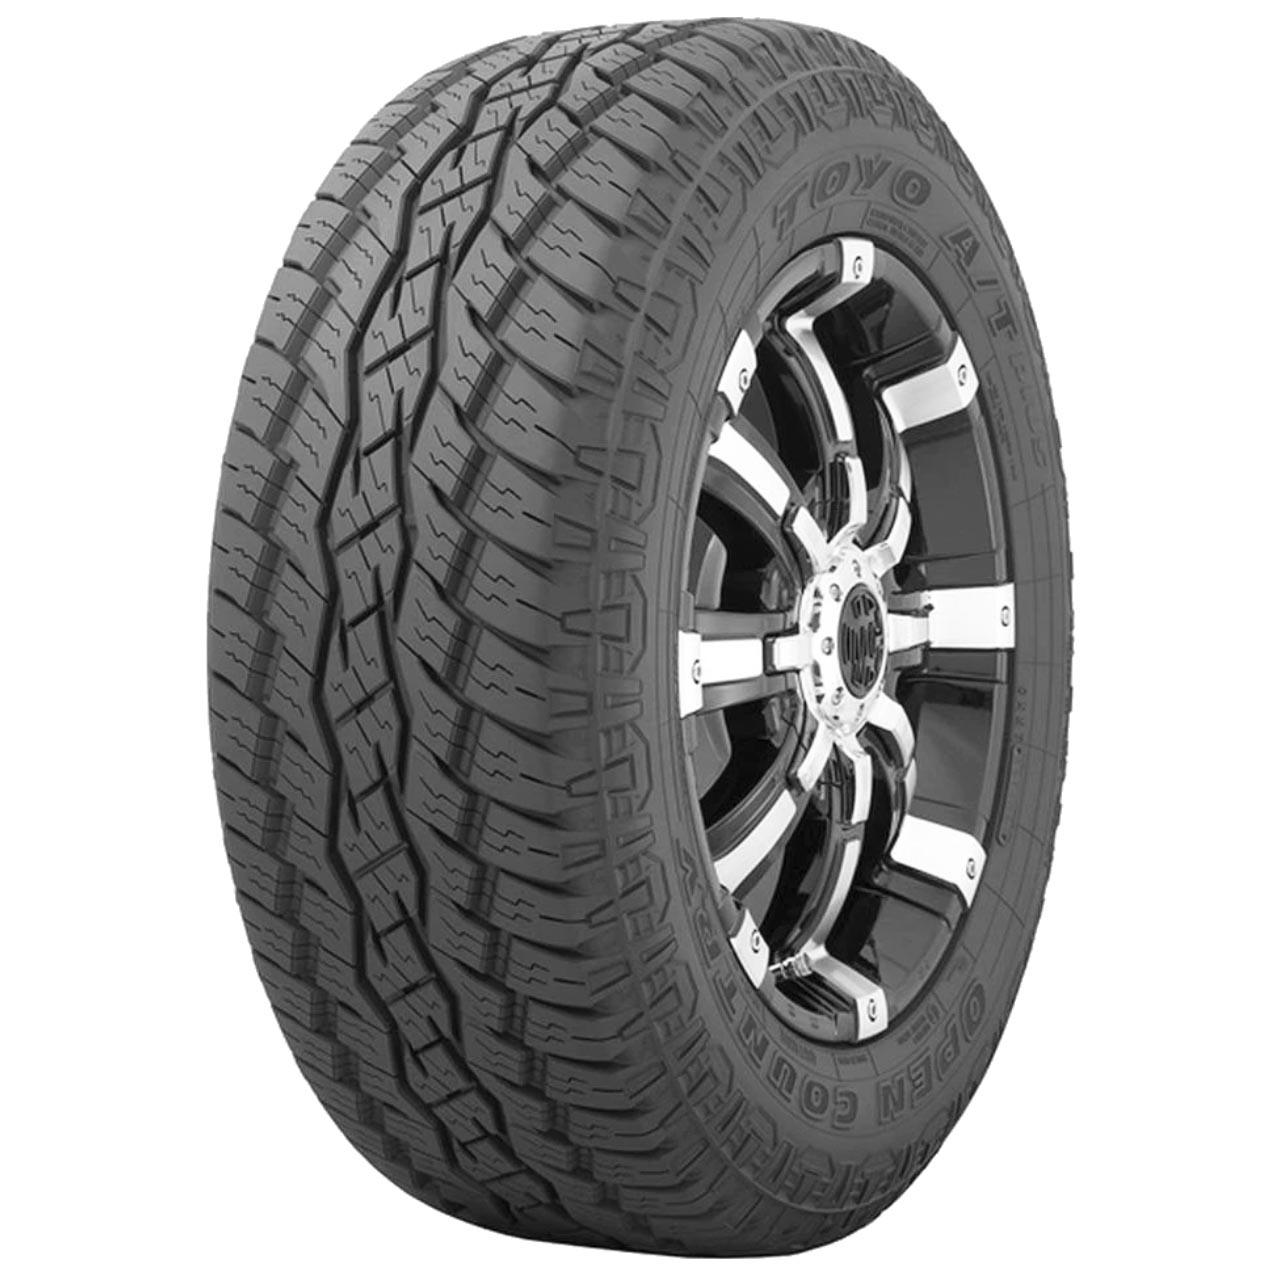 Toyo Open Country AT Plus 175/80R16 91S